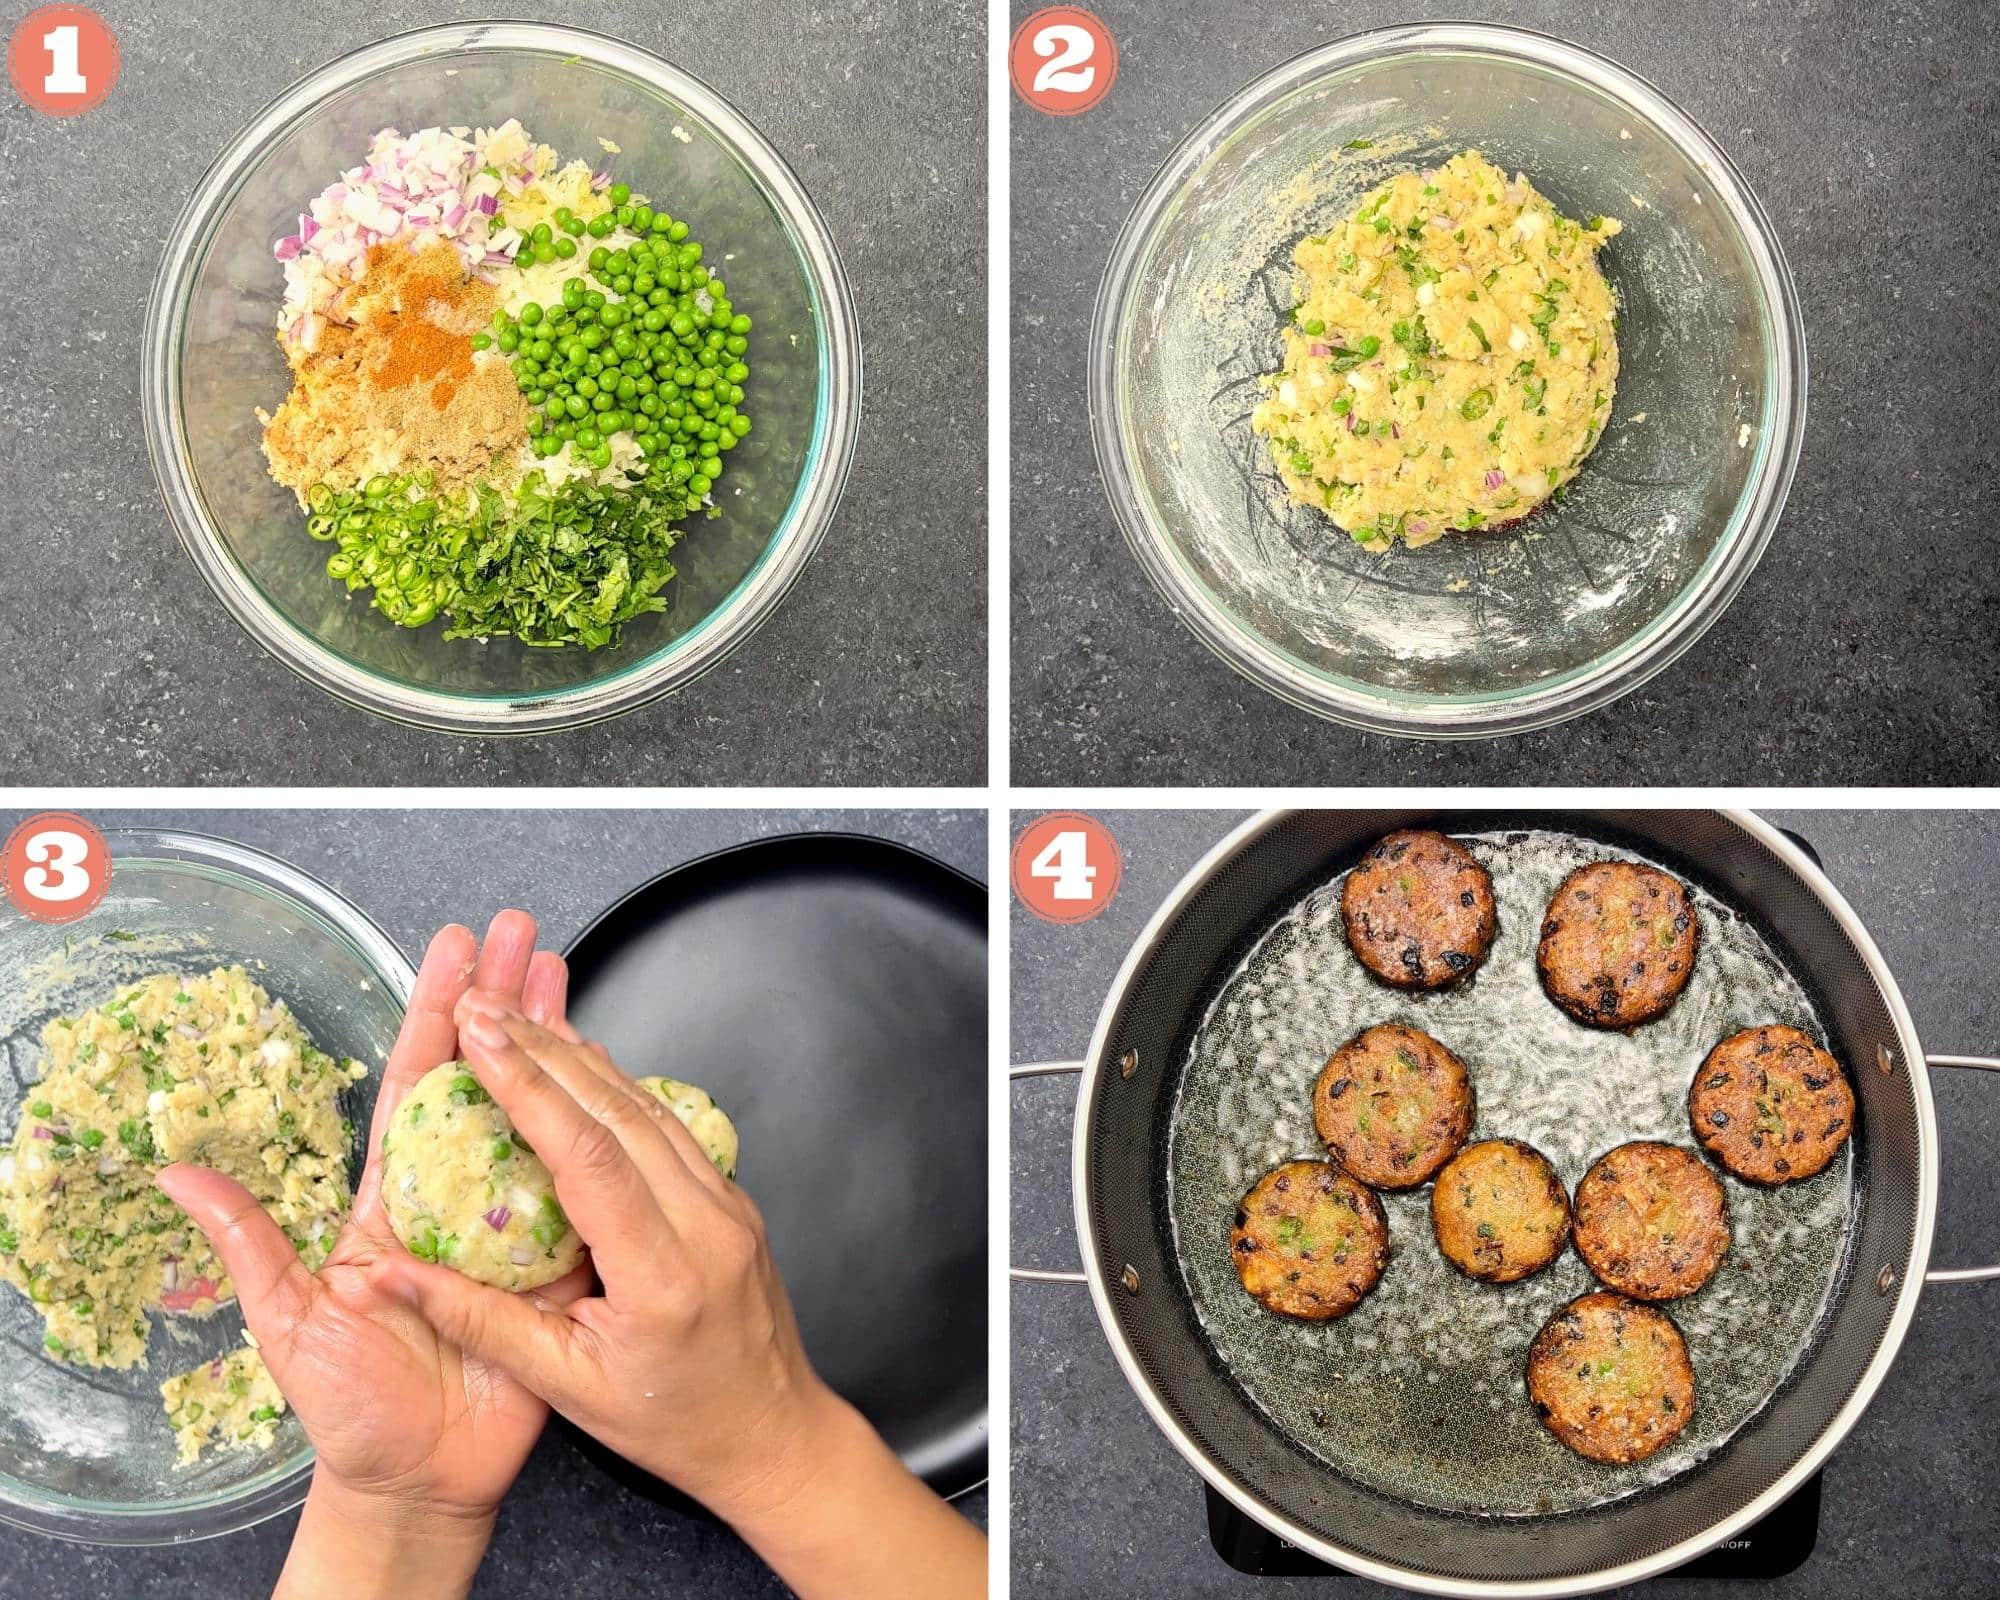 Steps 1-4 showing how to bind, shape, and fry potato patties called tikki